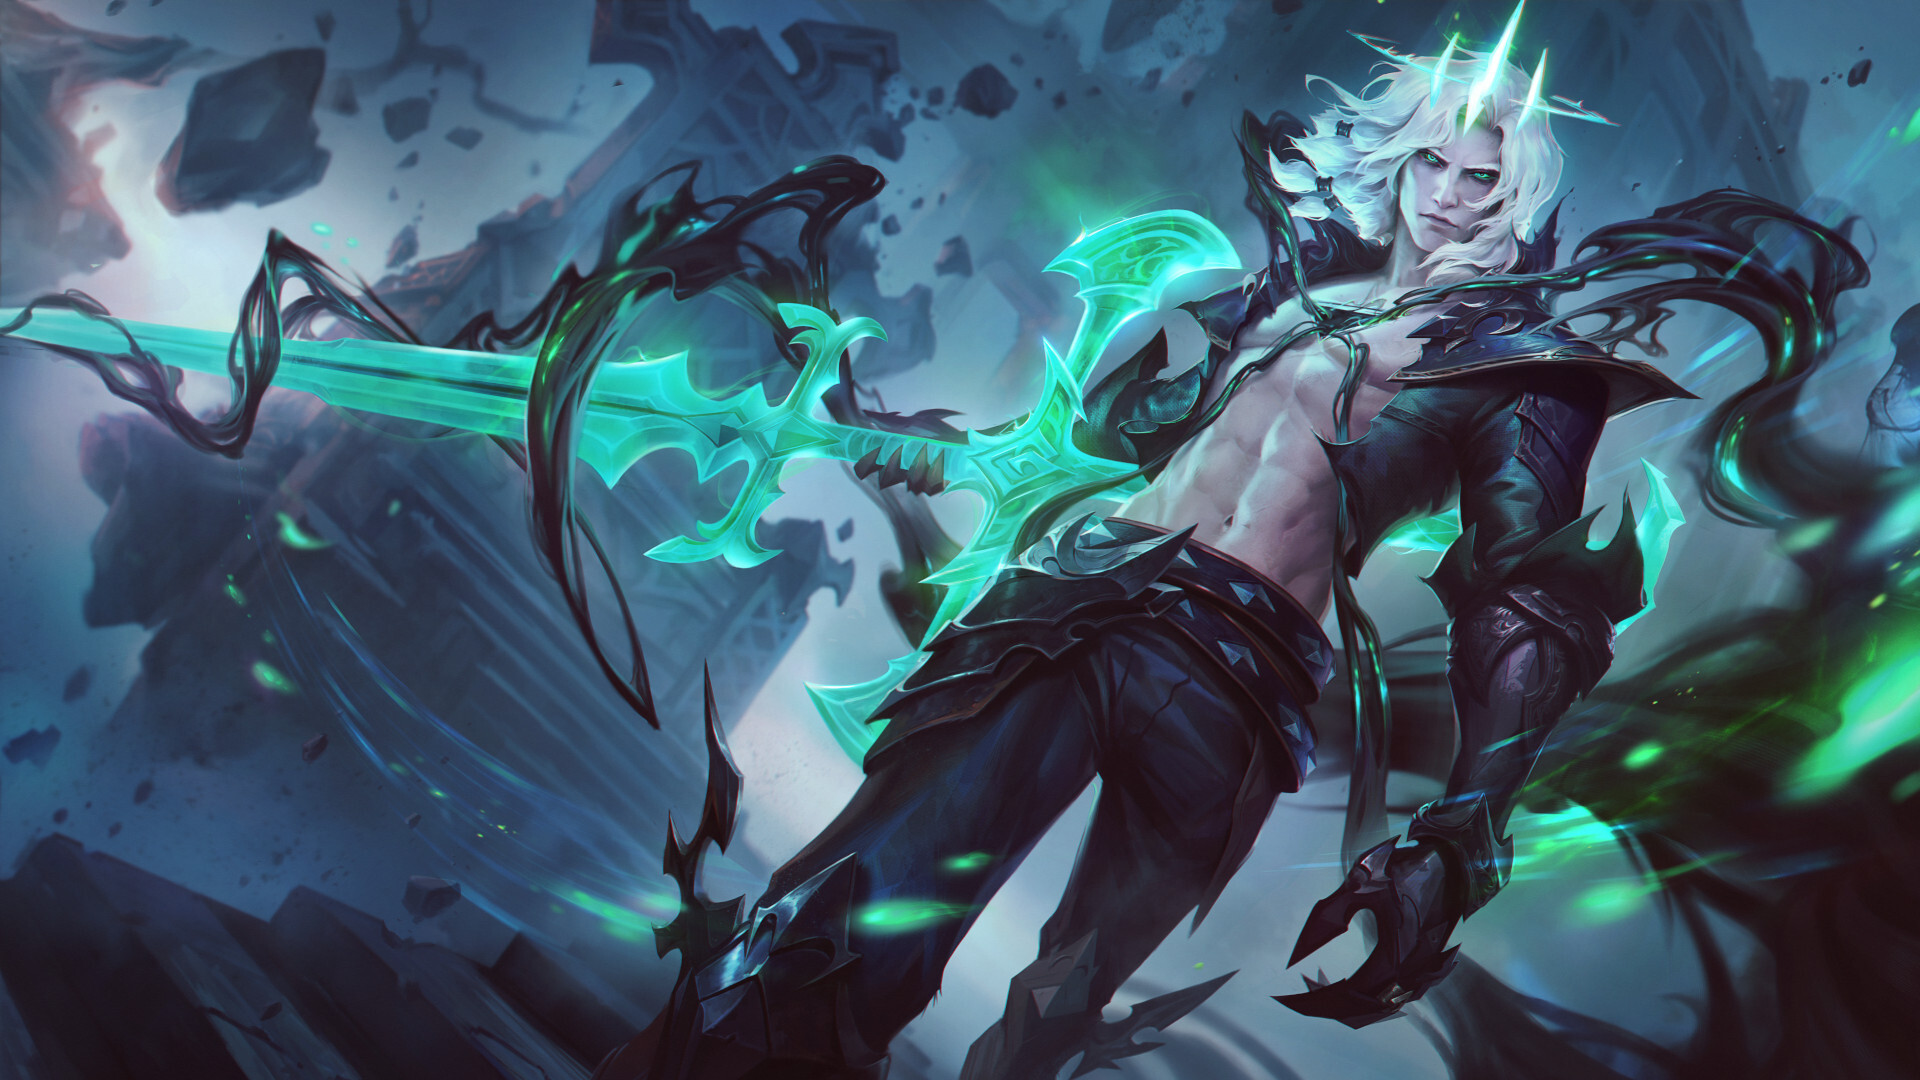 Riot unveils new jungler Viego, the Ruined King, which launches later this month